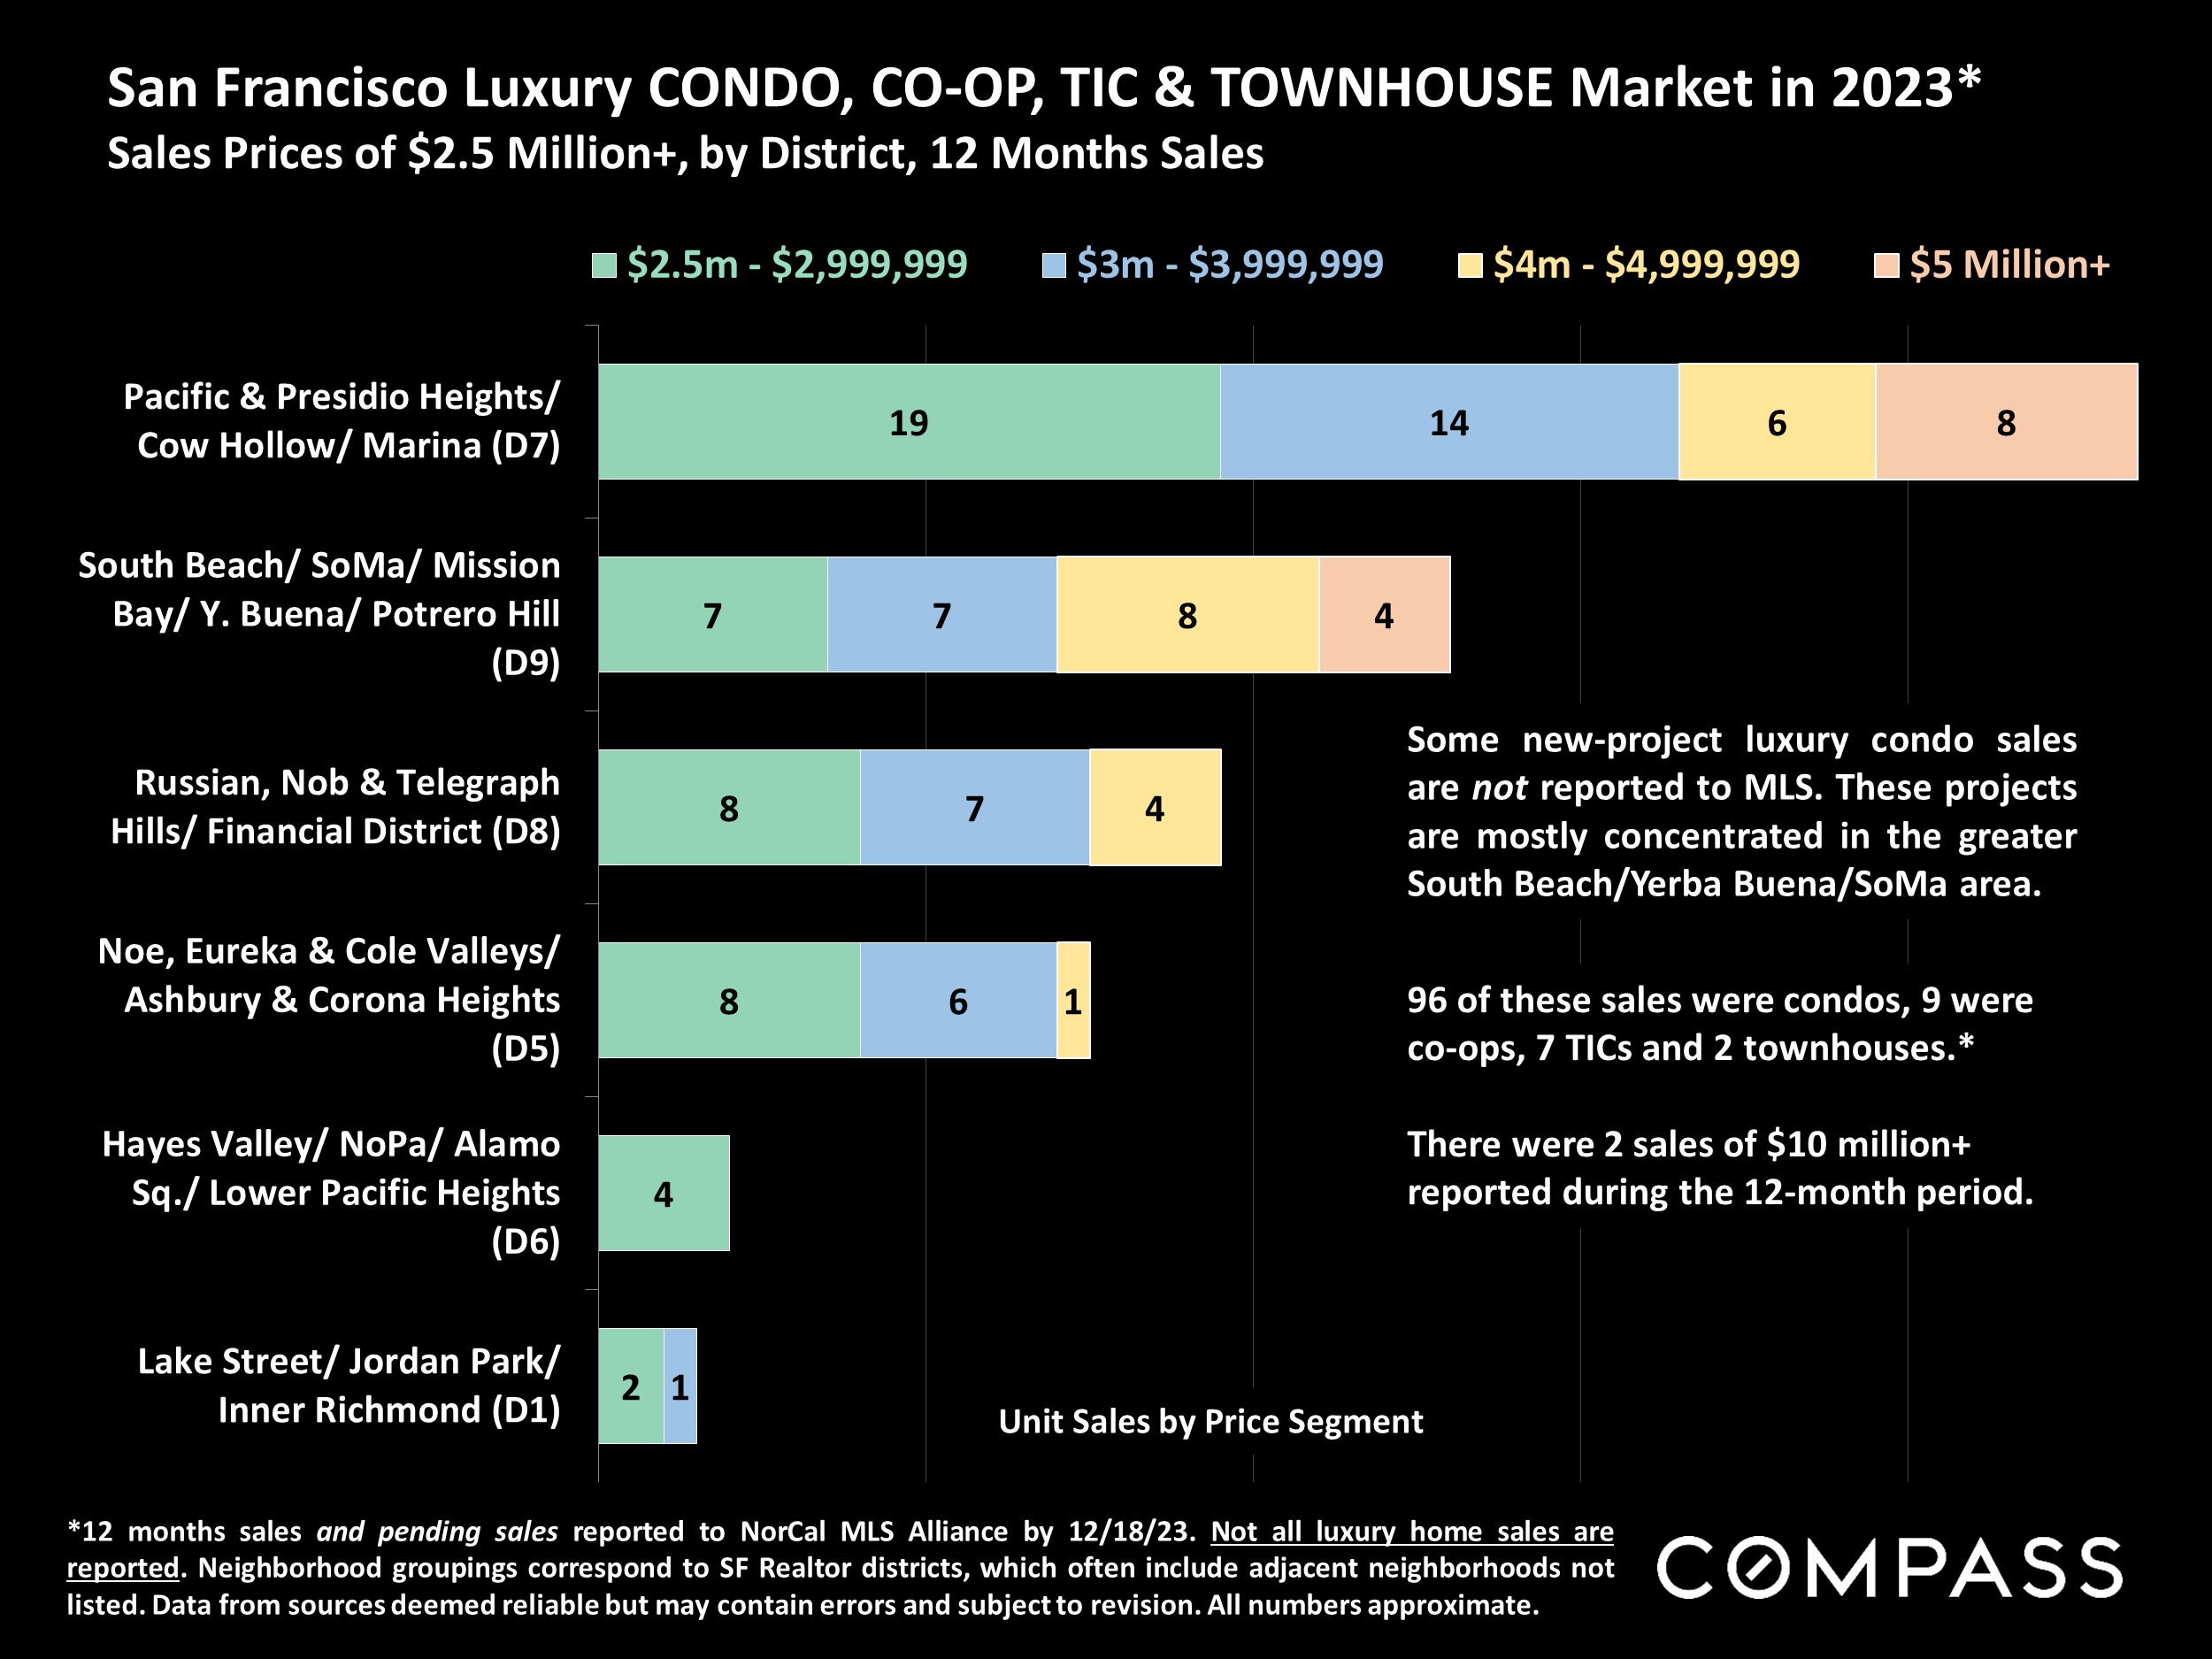 San Francisco Luxury CONDO, CO-OP, TIC & TOWNHOUSE Market in 2023* Sales Prices of $2.5 Million+, by District, 12 Months Sales